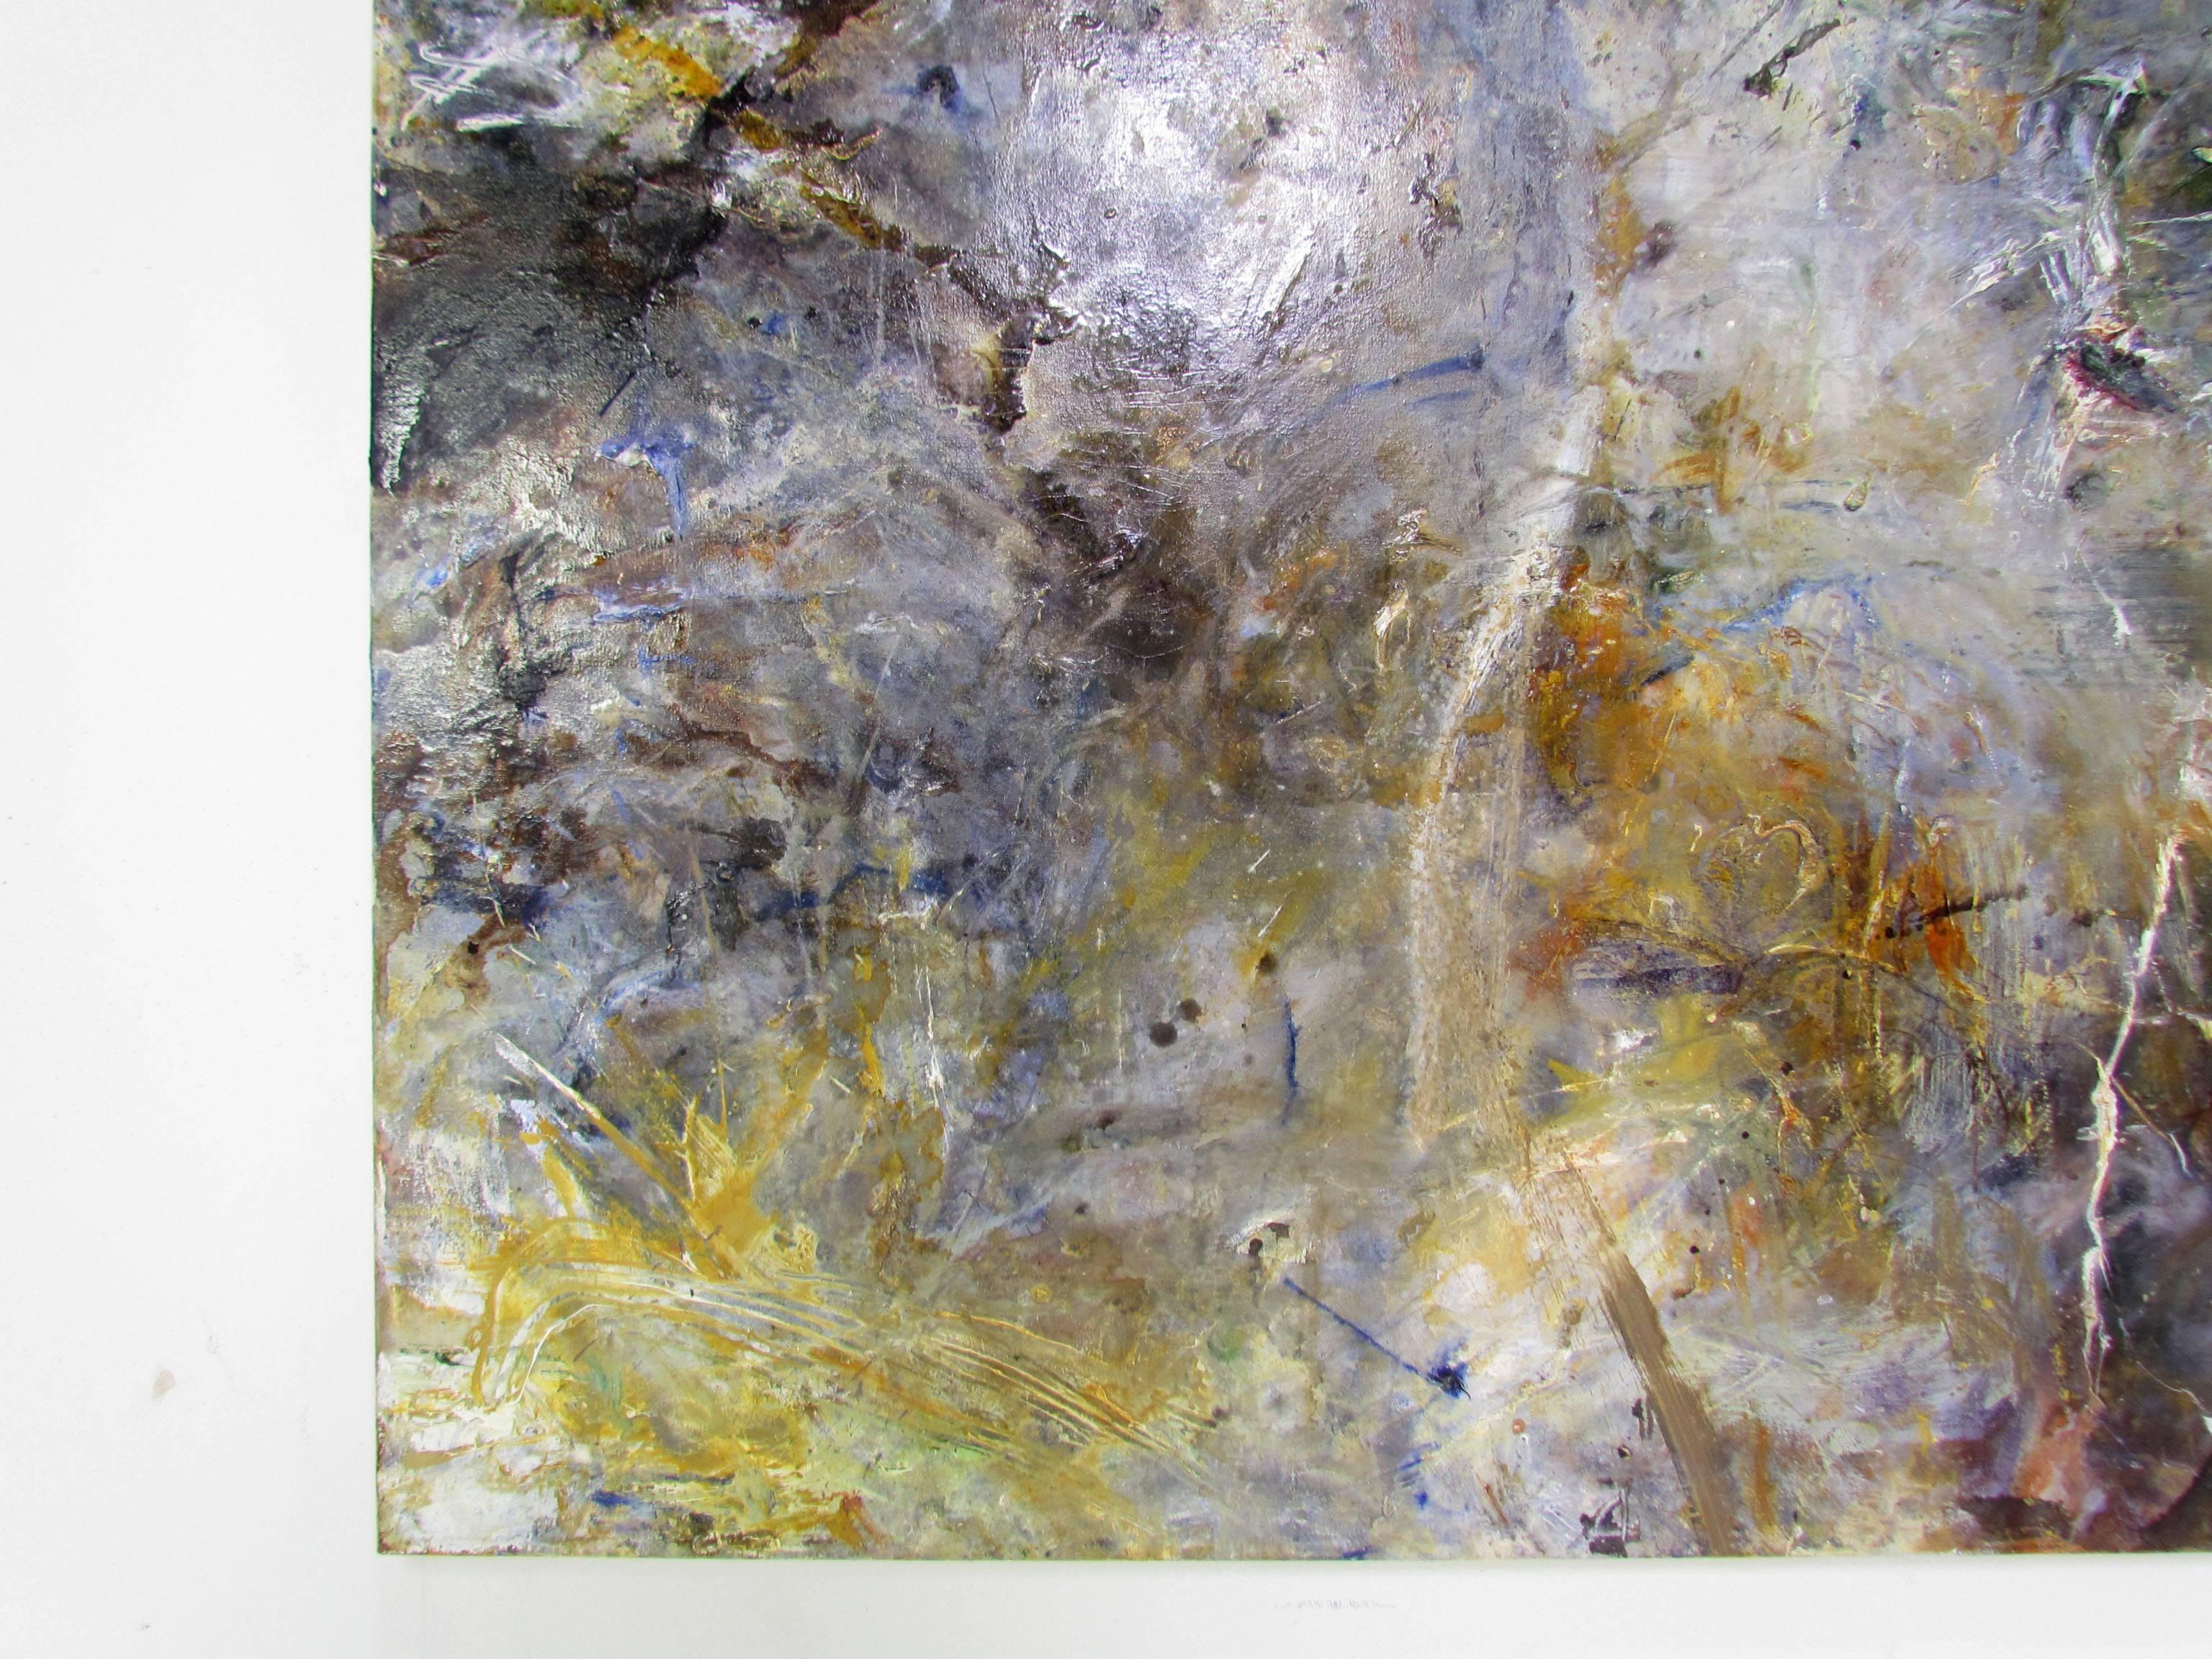 British Abstract Ethereal Large Oil Painting on Canvas by Noted Artist Rachel Budd